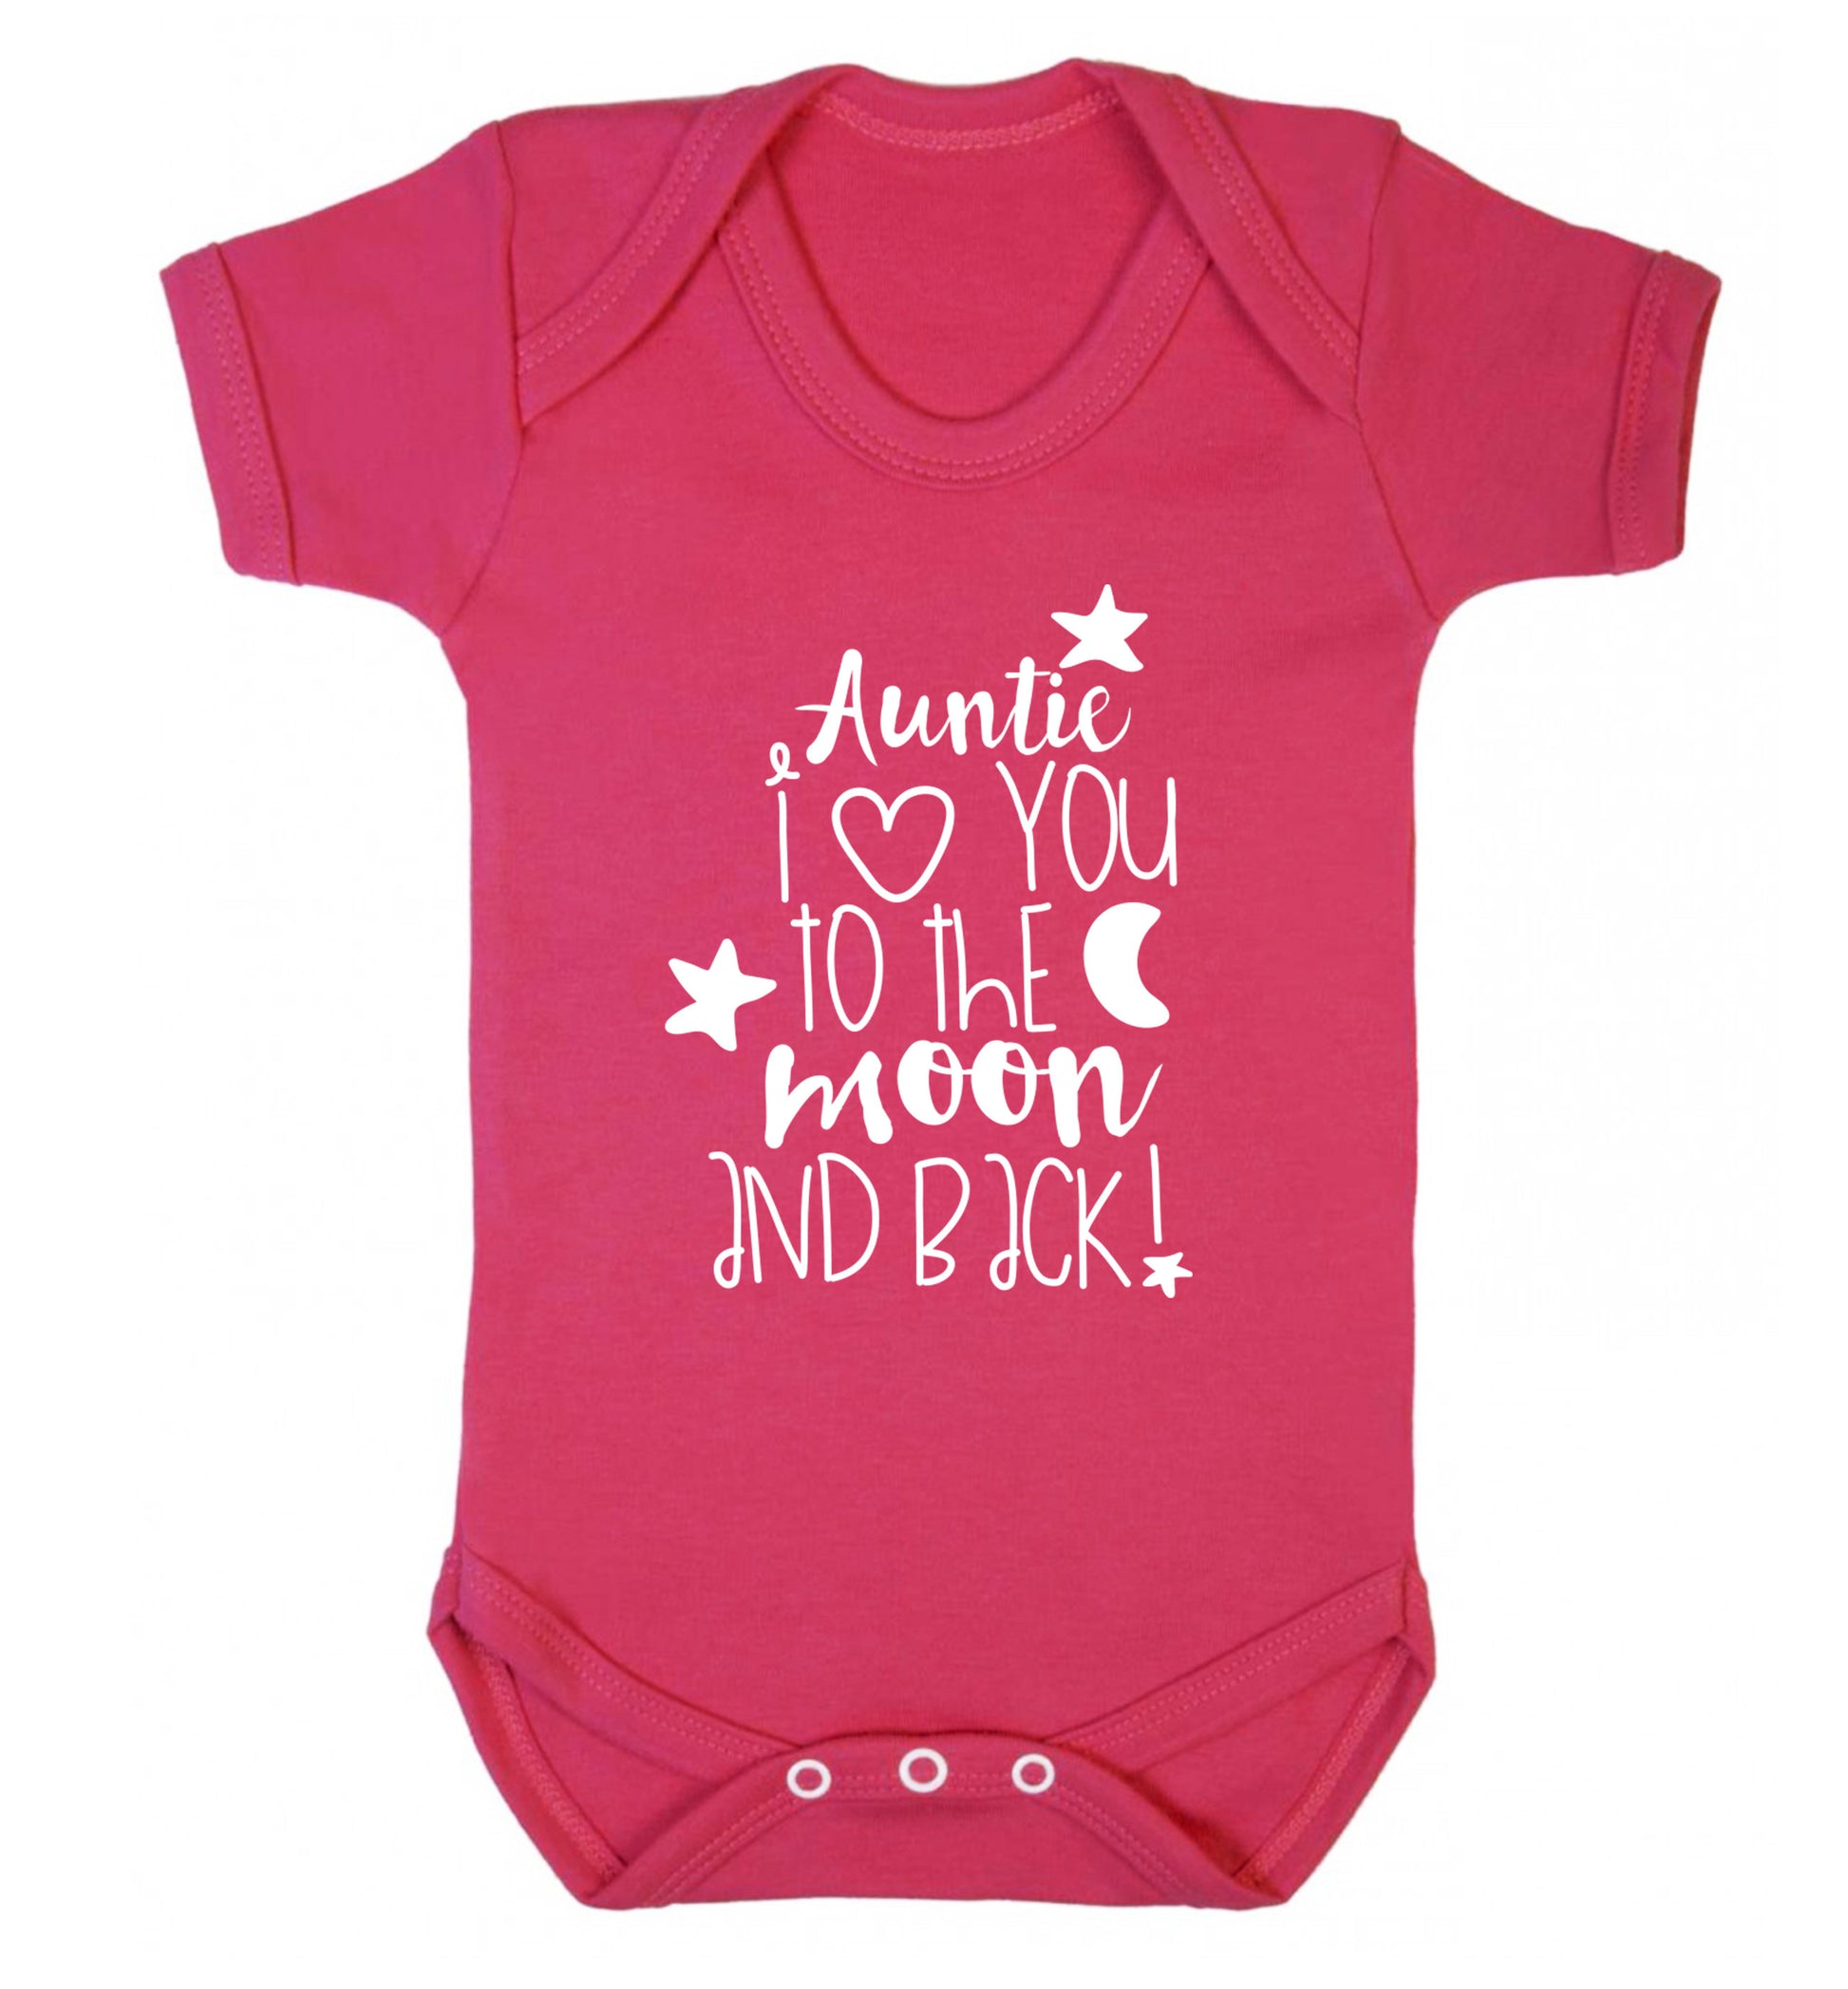 Auntie I love you to the moon and back Baby Vest dark pink 18-24 months